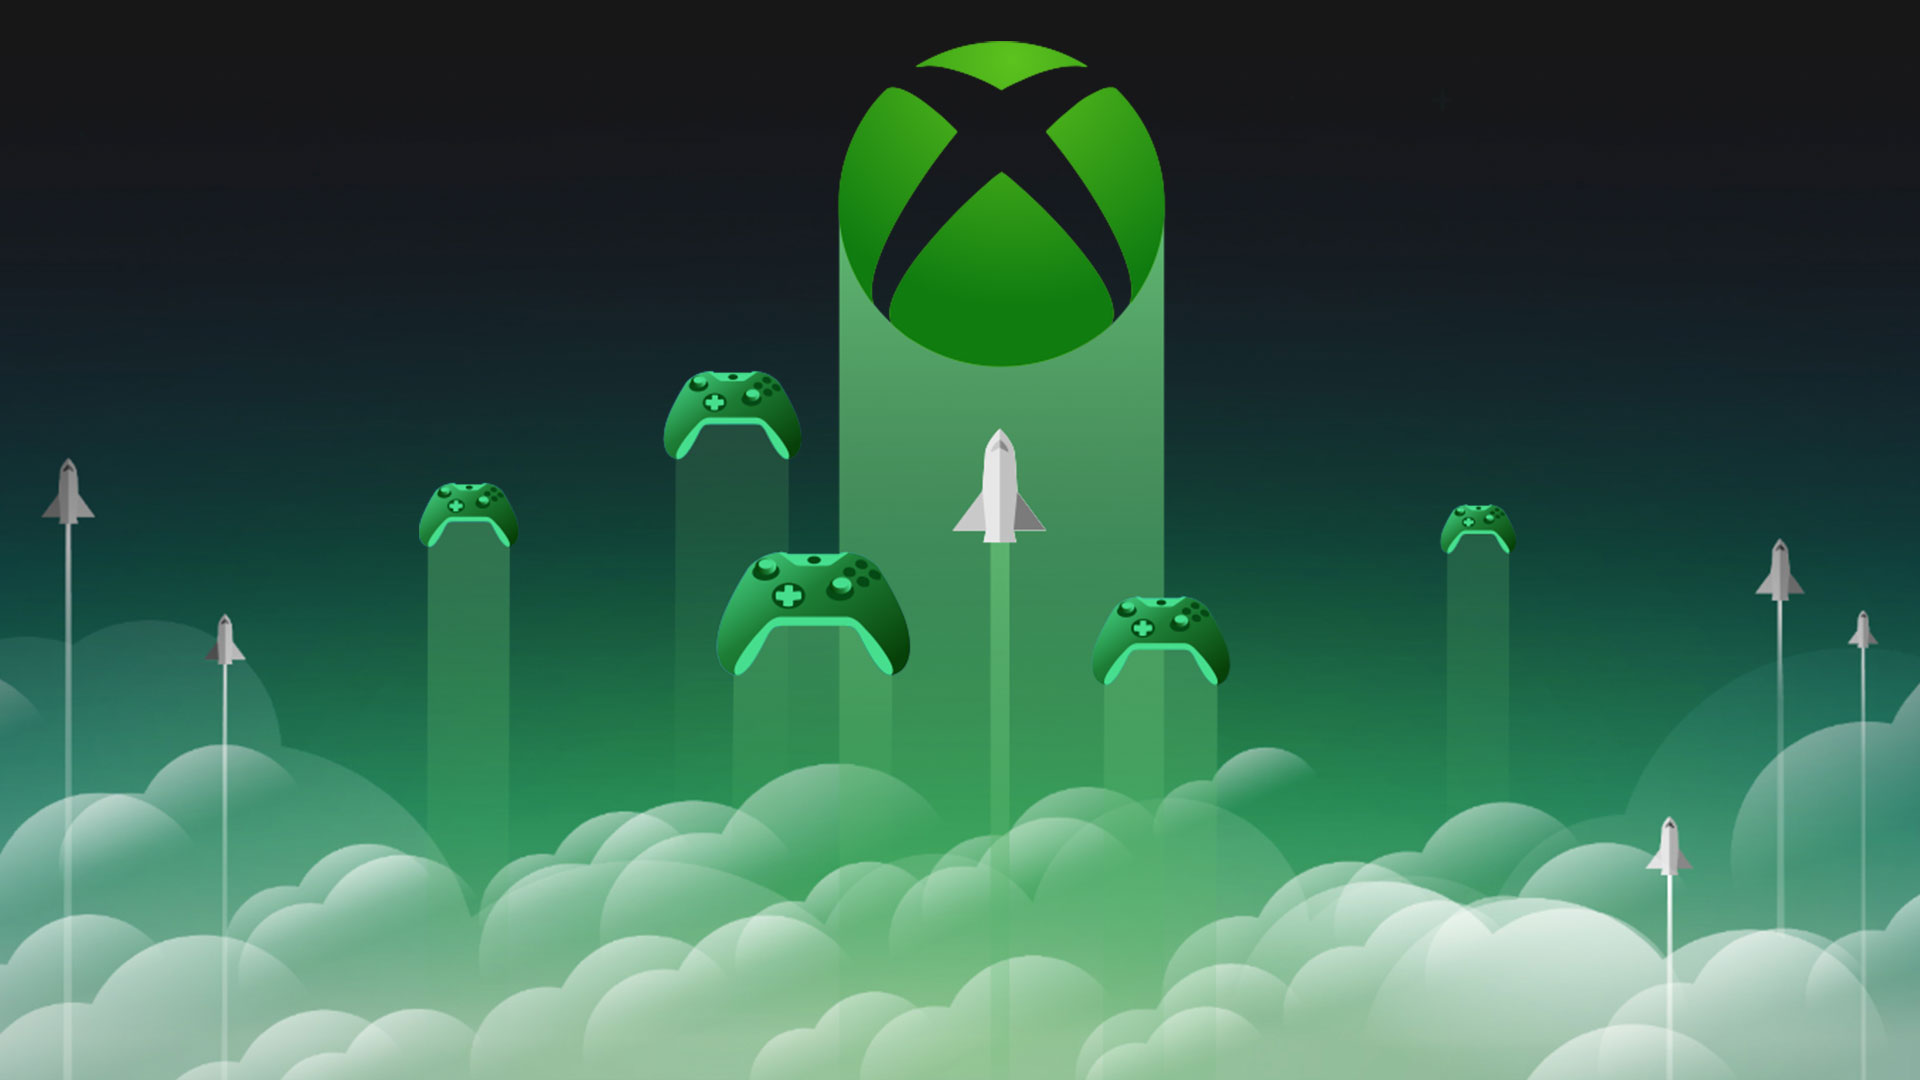 Business of Esports - Xbox, Xbox 360 Games Added To Microsoft's Cloud Gaming  Program